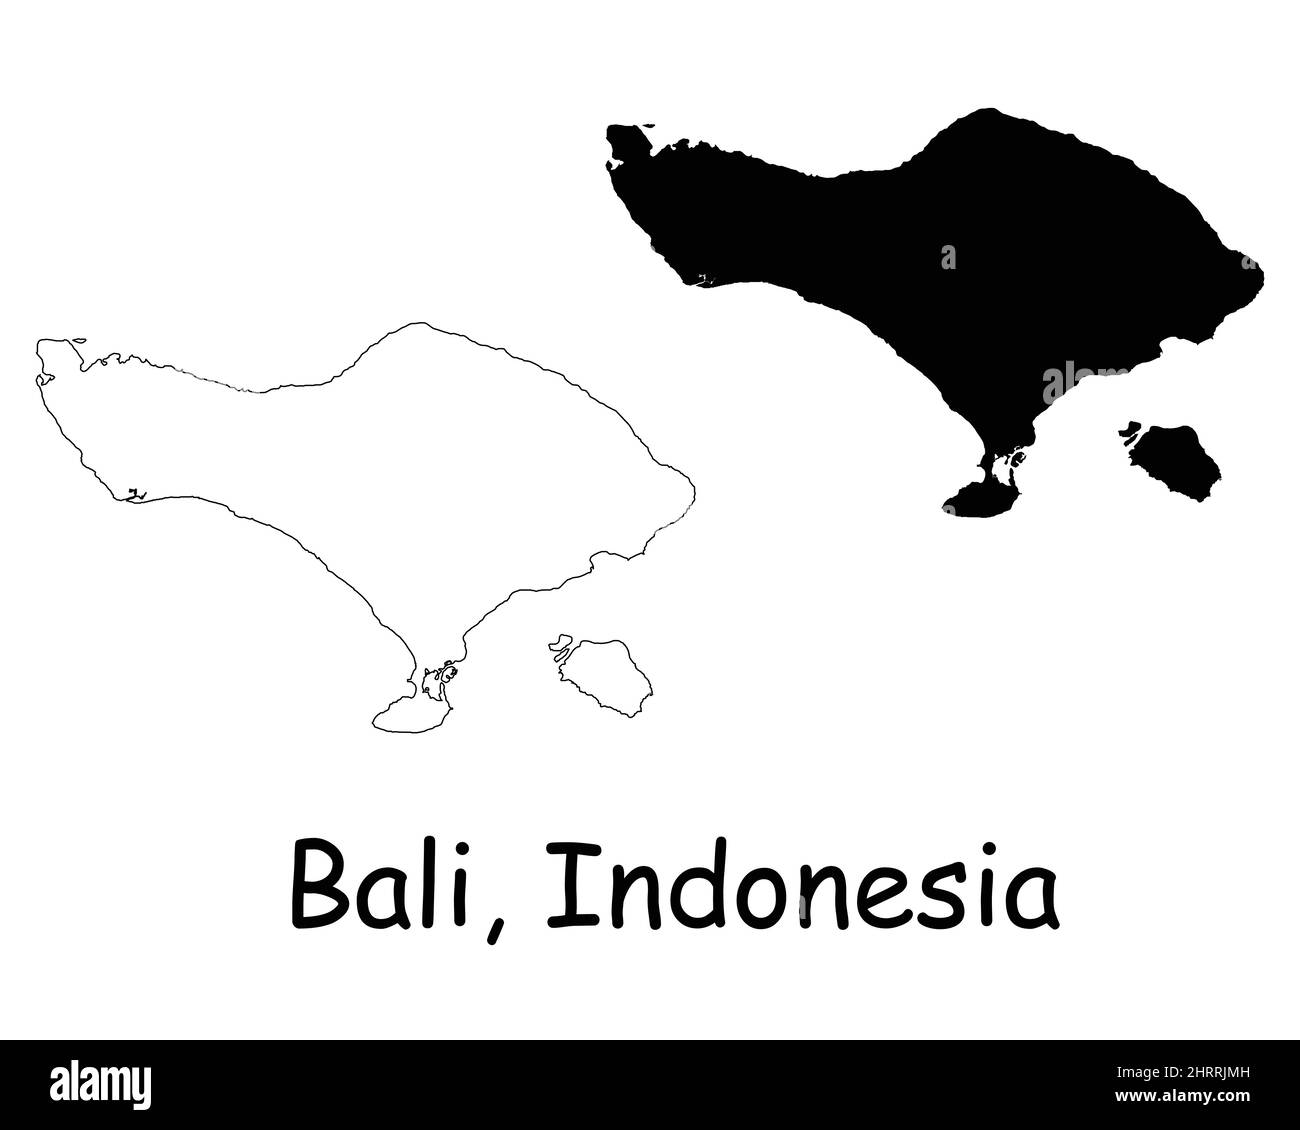 Bali Indonesia Map. Black silhouette and outline isolated Indonesian Province Island on white background. Bali Territory Border Boundary Line Icon Sig Stock Vector